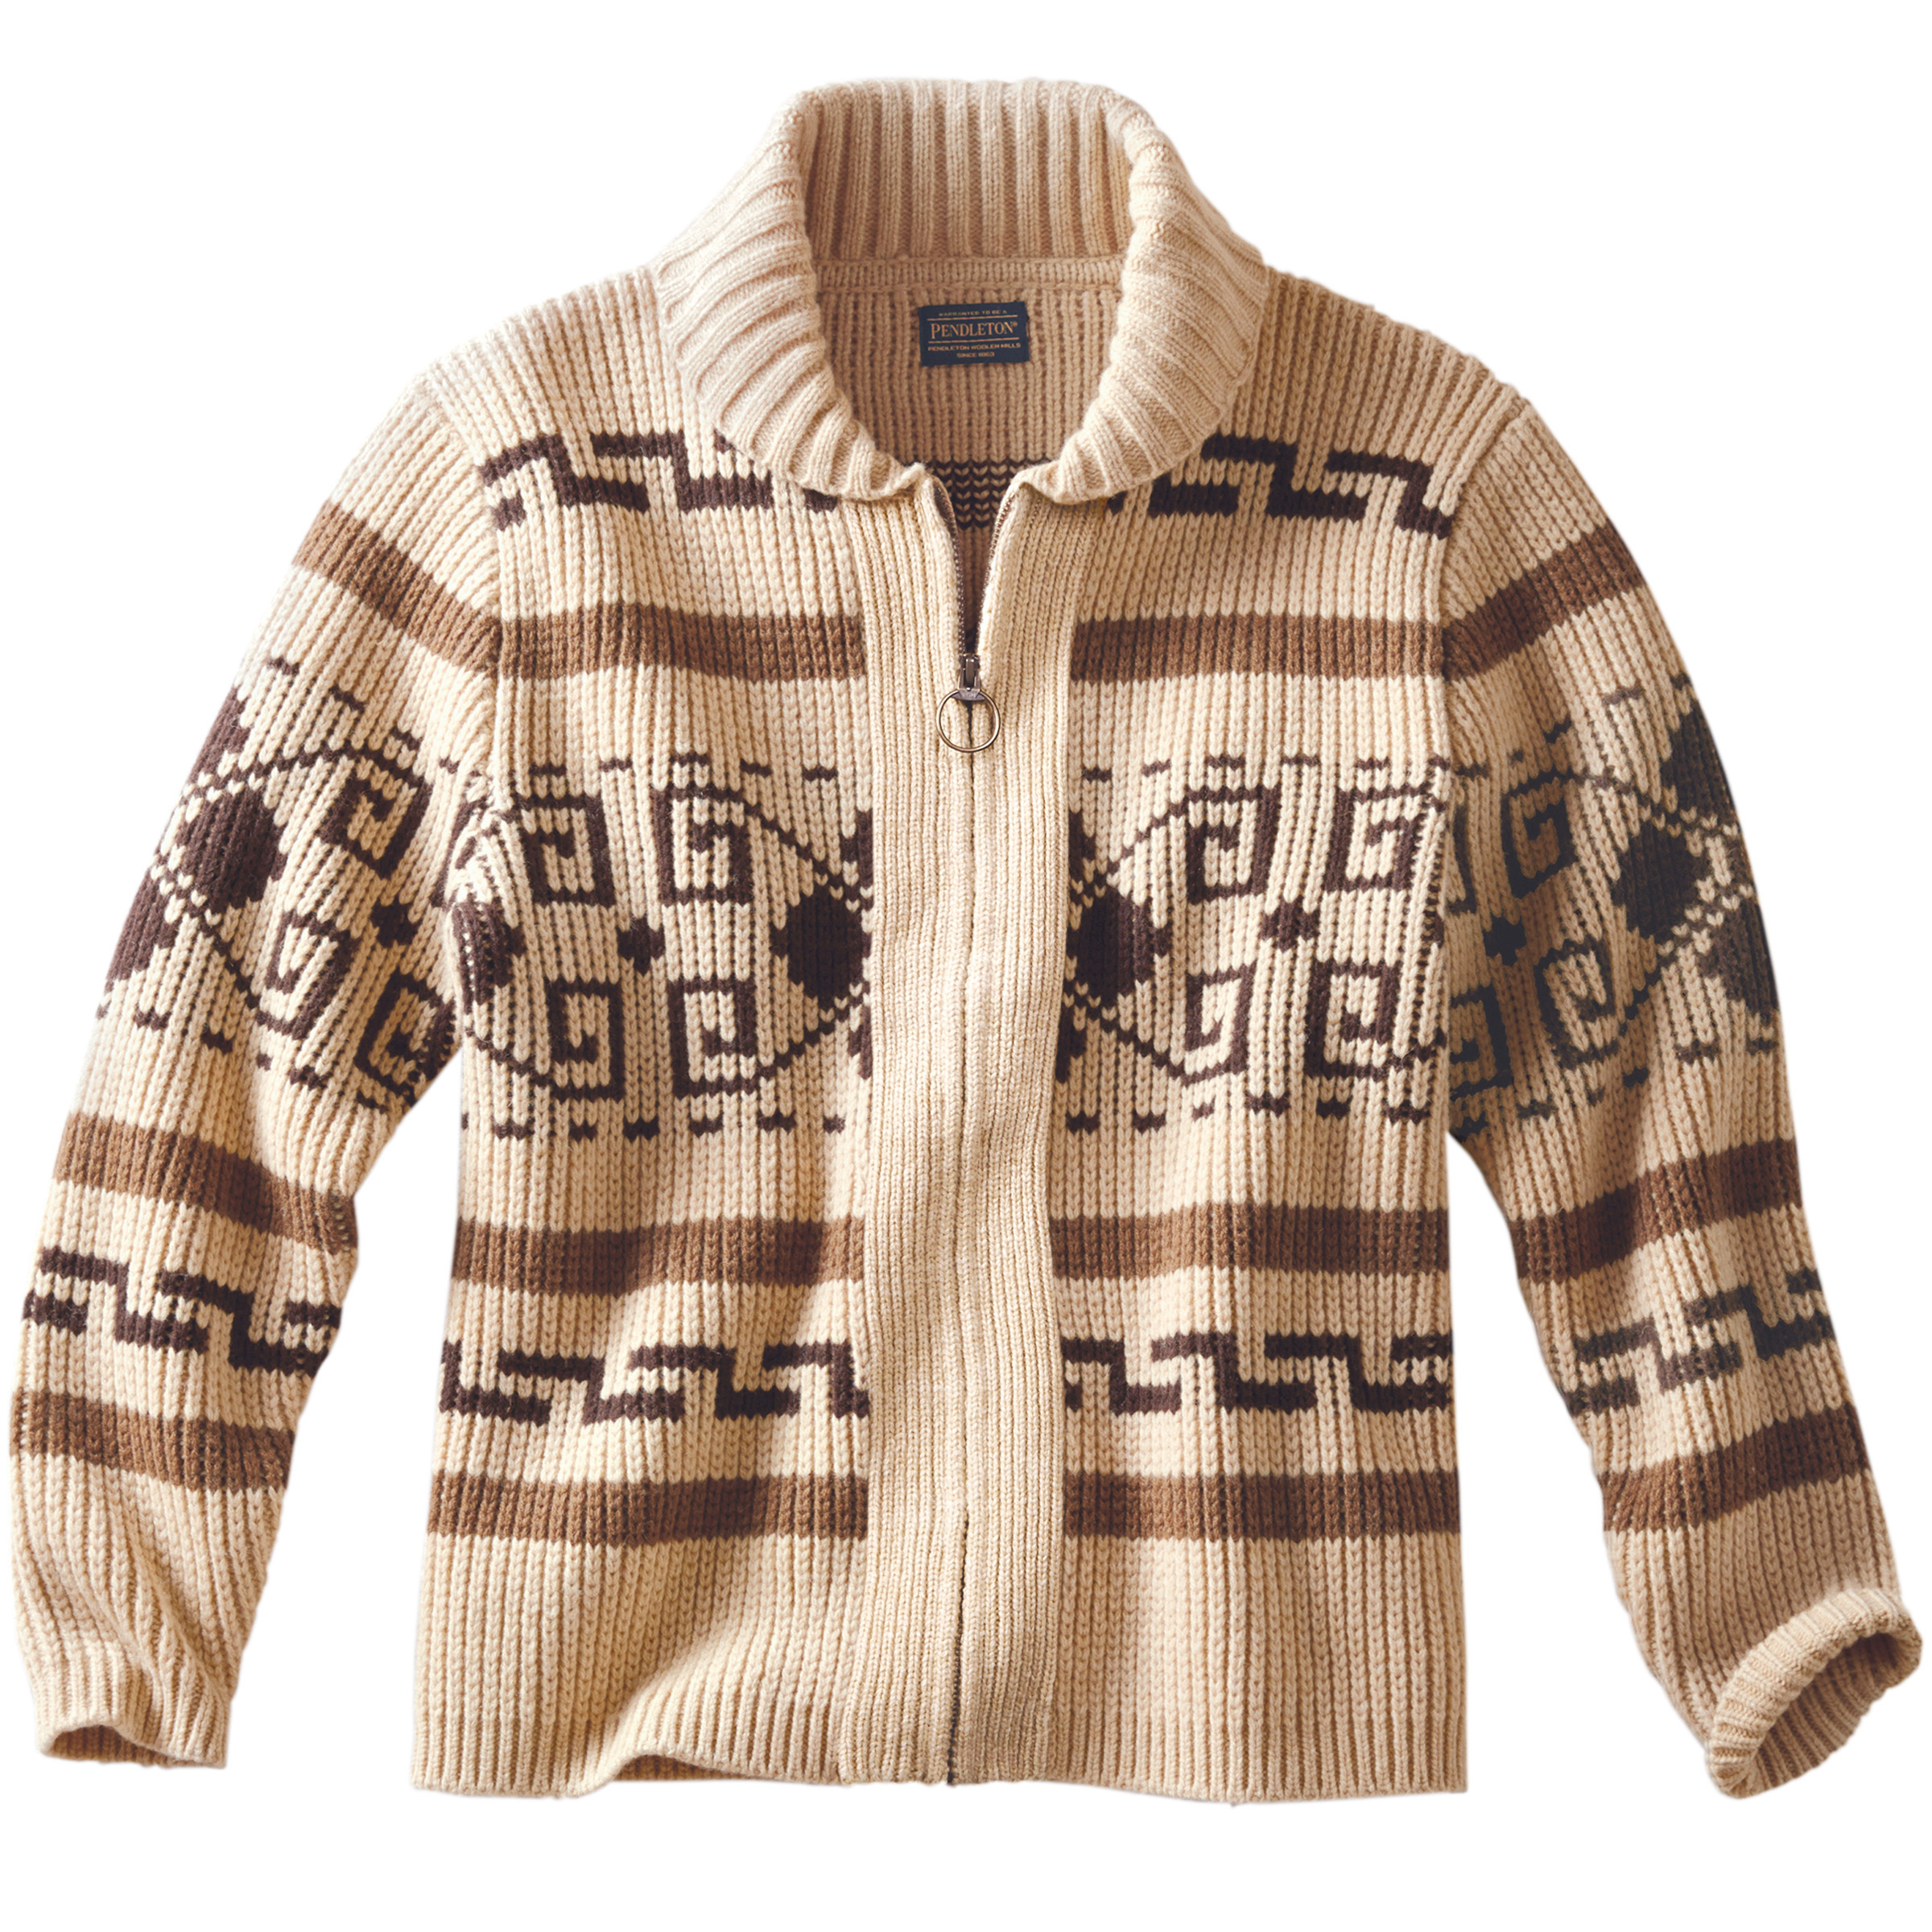 "The Dude" Sweater from Pendleton